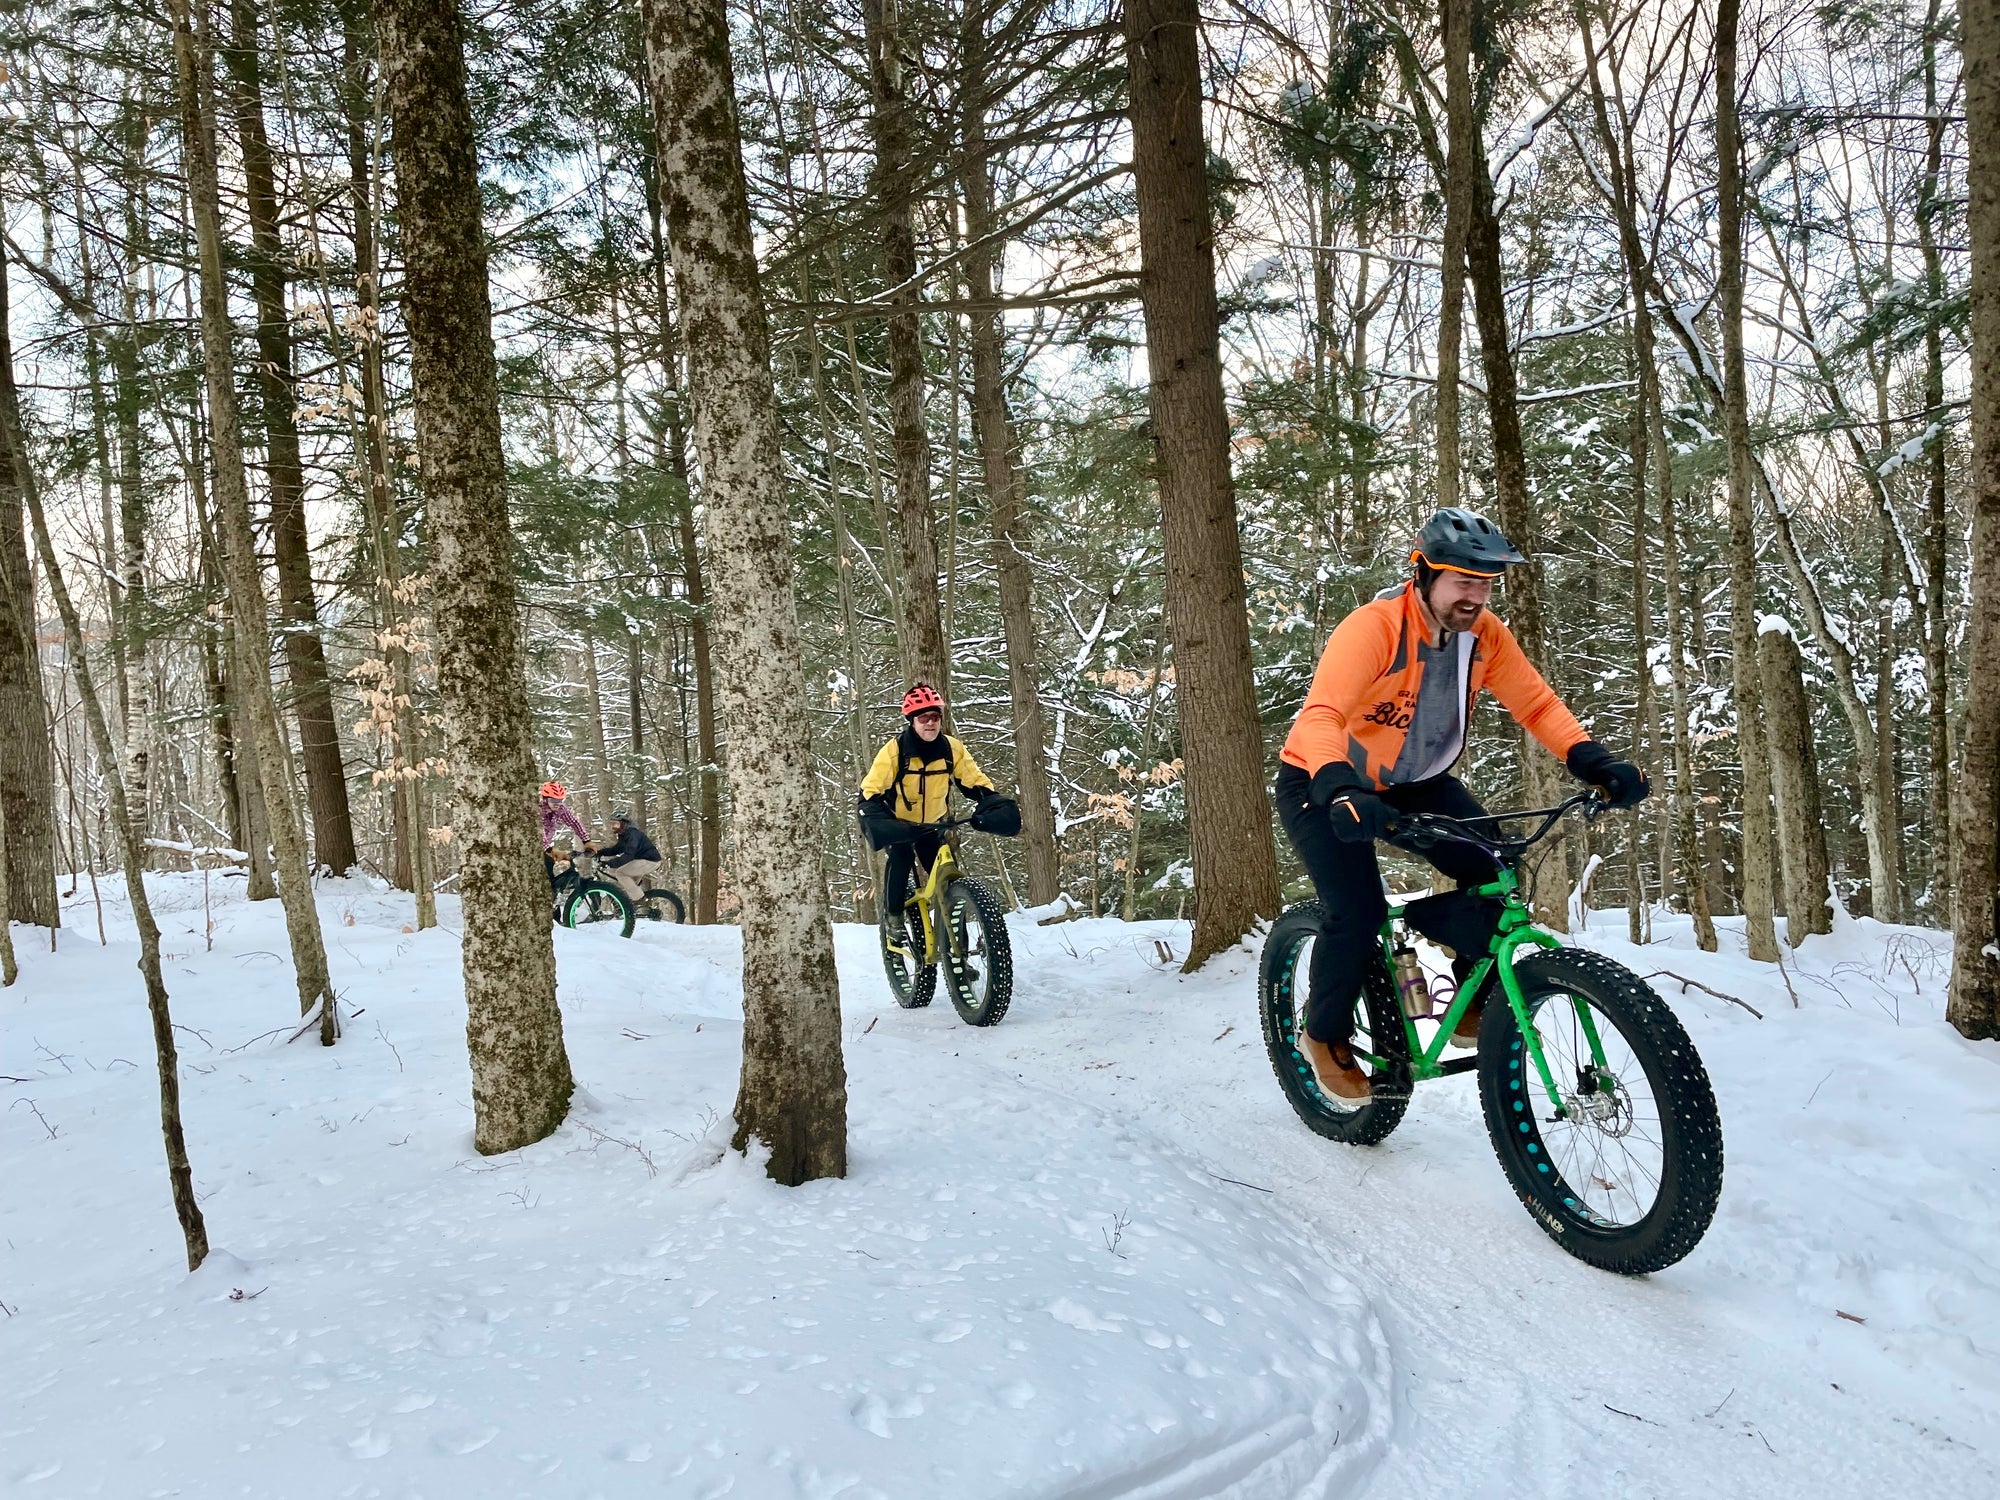 A person riding a fat bike on a snow packed trail in the woods